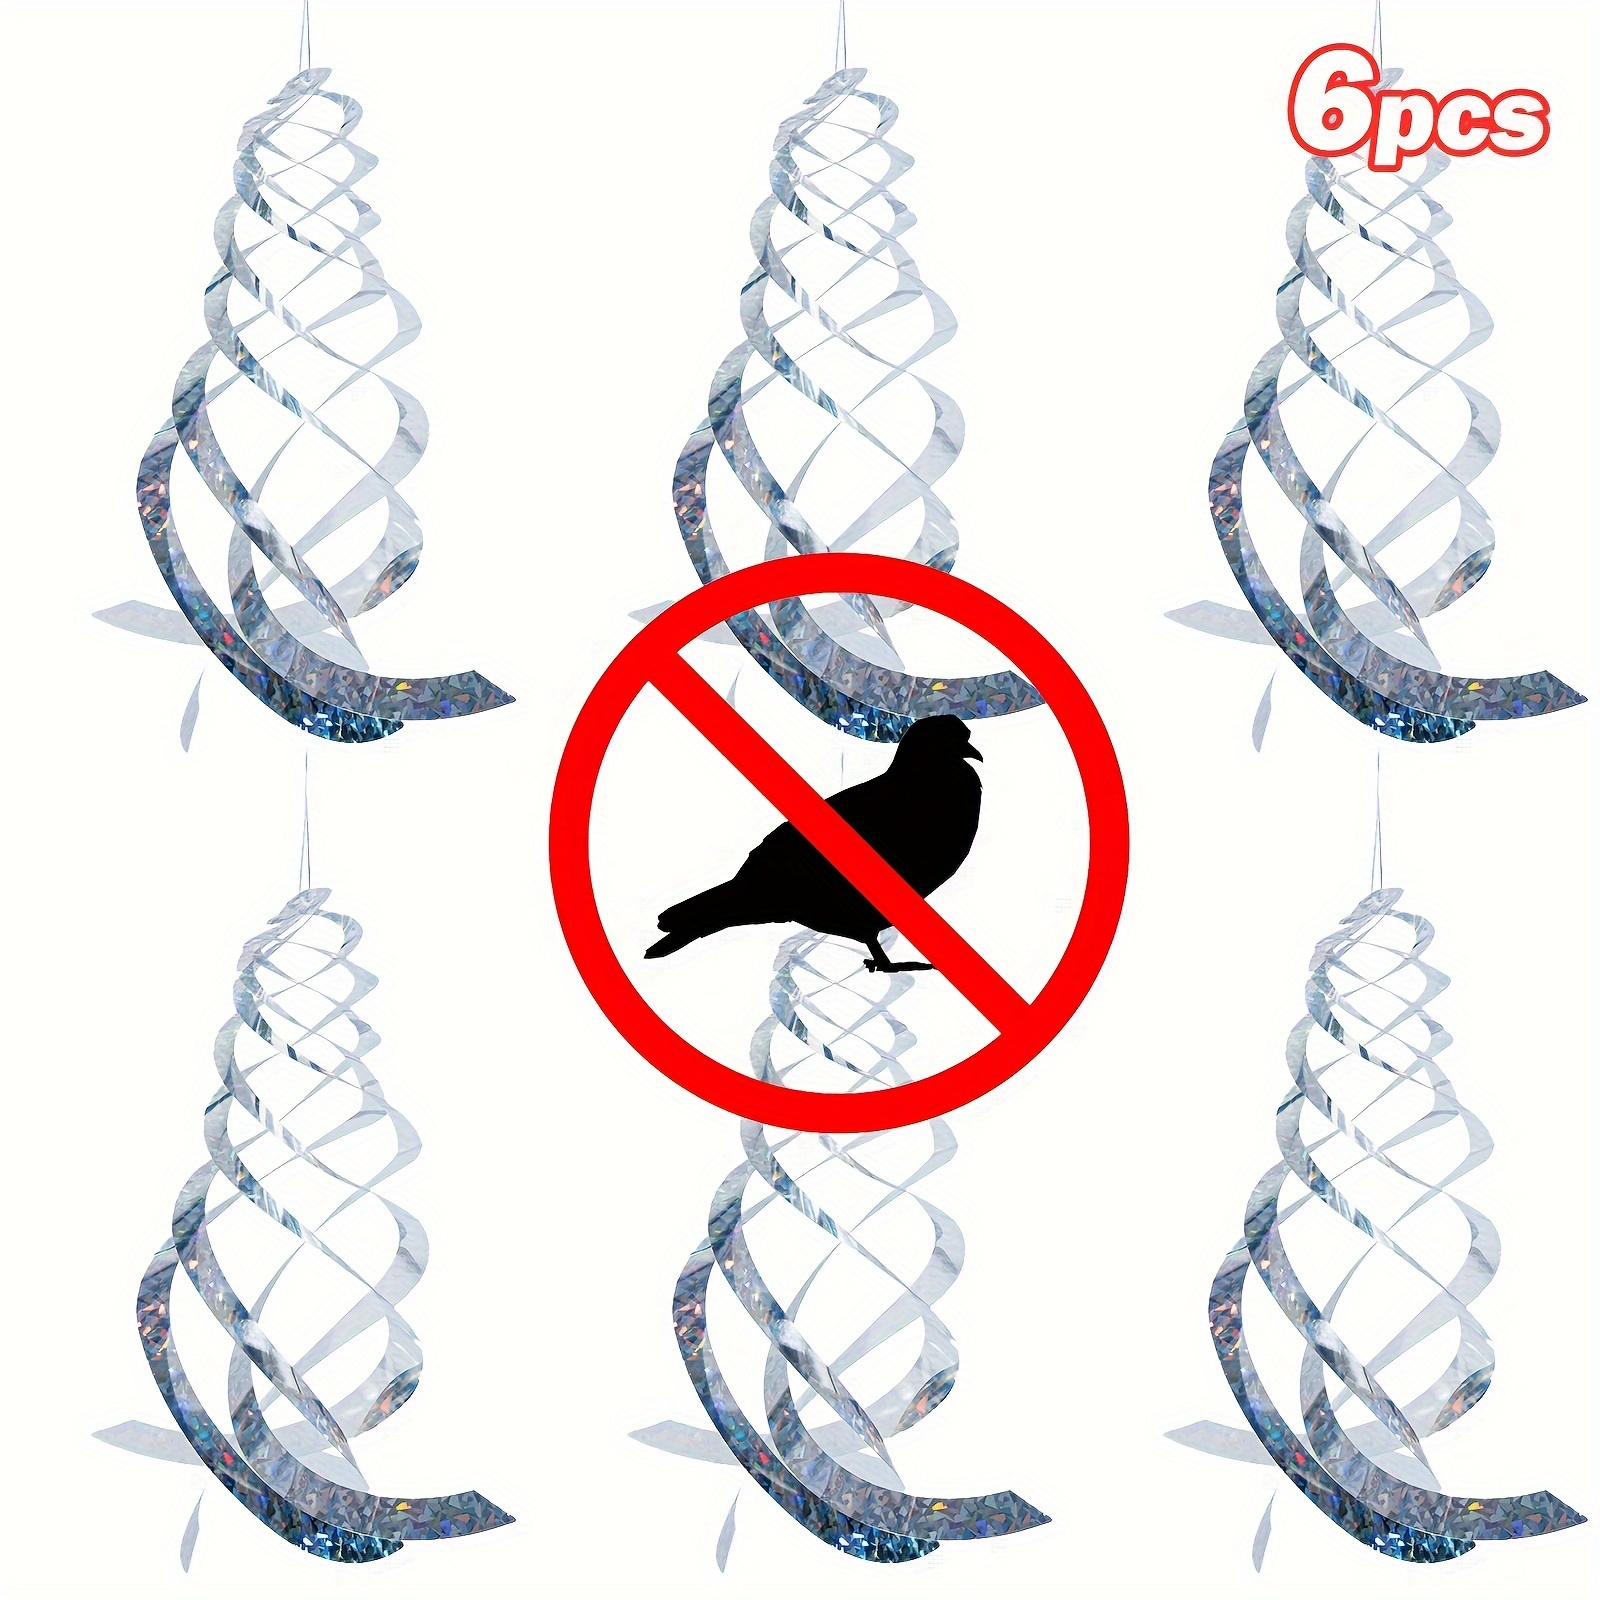 

6pcs, Bird Repellent Spiral Reflectors-15.8 Inch Hanging Reflective Bird Deterrent Device For Drive Birds Woodpeckers Pigeons Geese Away From The House Garden Swimming Pool